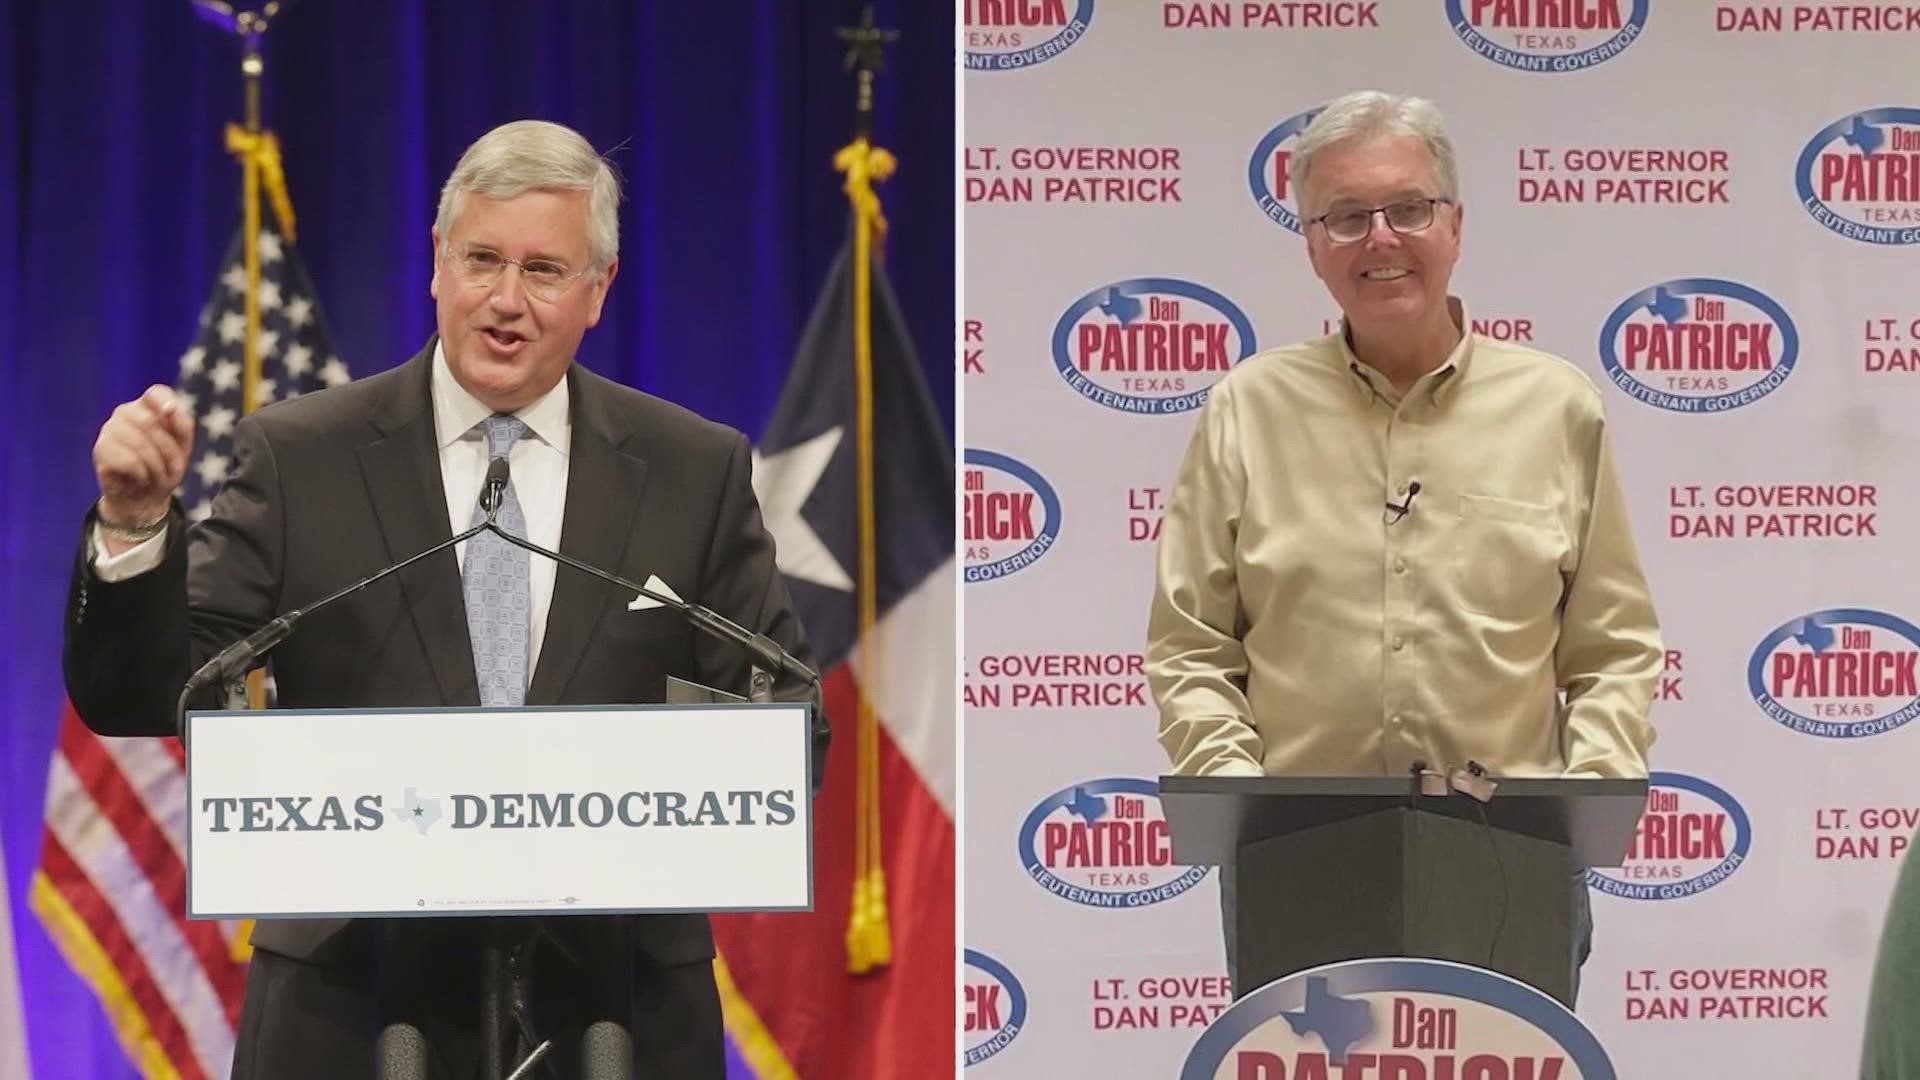 Is there a Republican revolt brewing? Some Republican officials have said they are backing the Democratic candidate for Texas lieutenant governor.